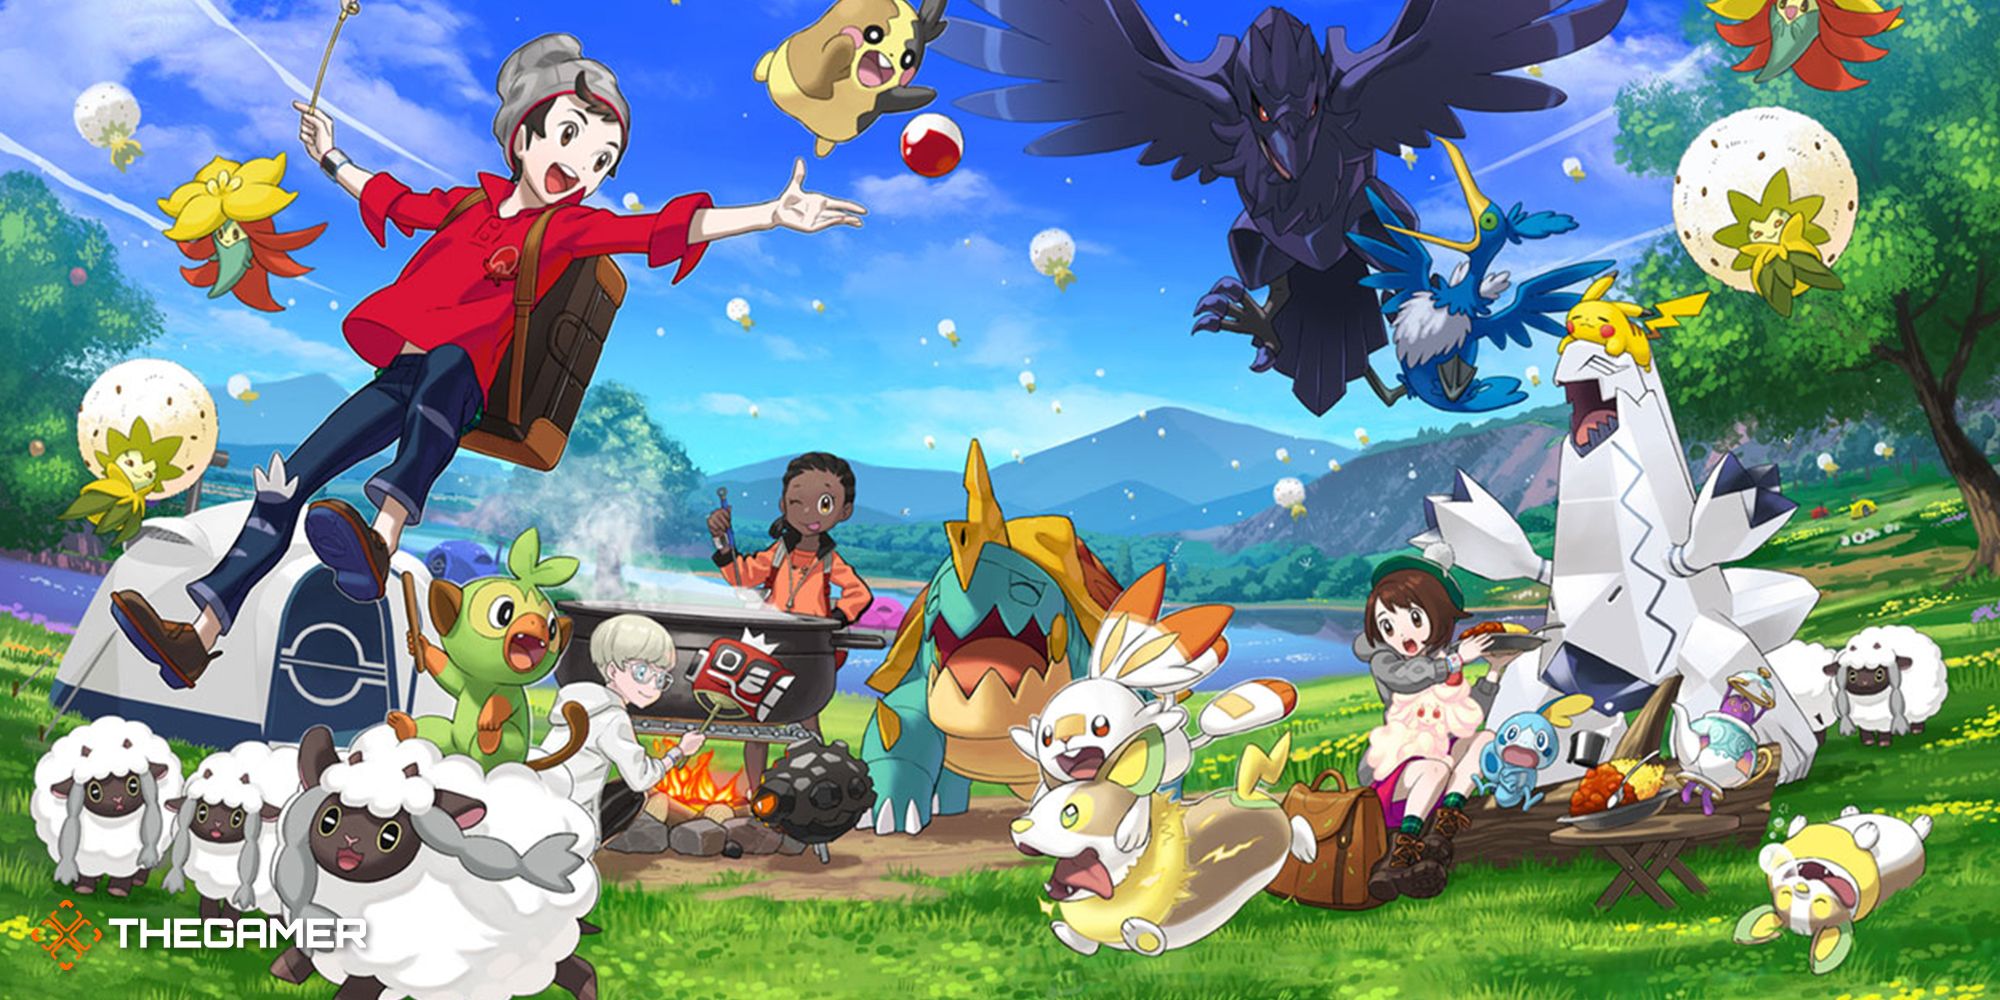 A trainer floats through the air surrounded by Pokemon on a sunny day.